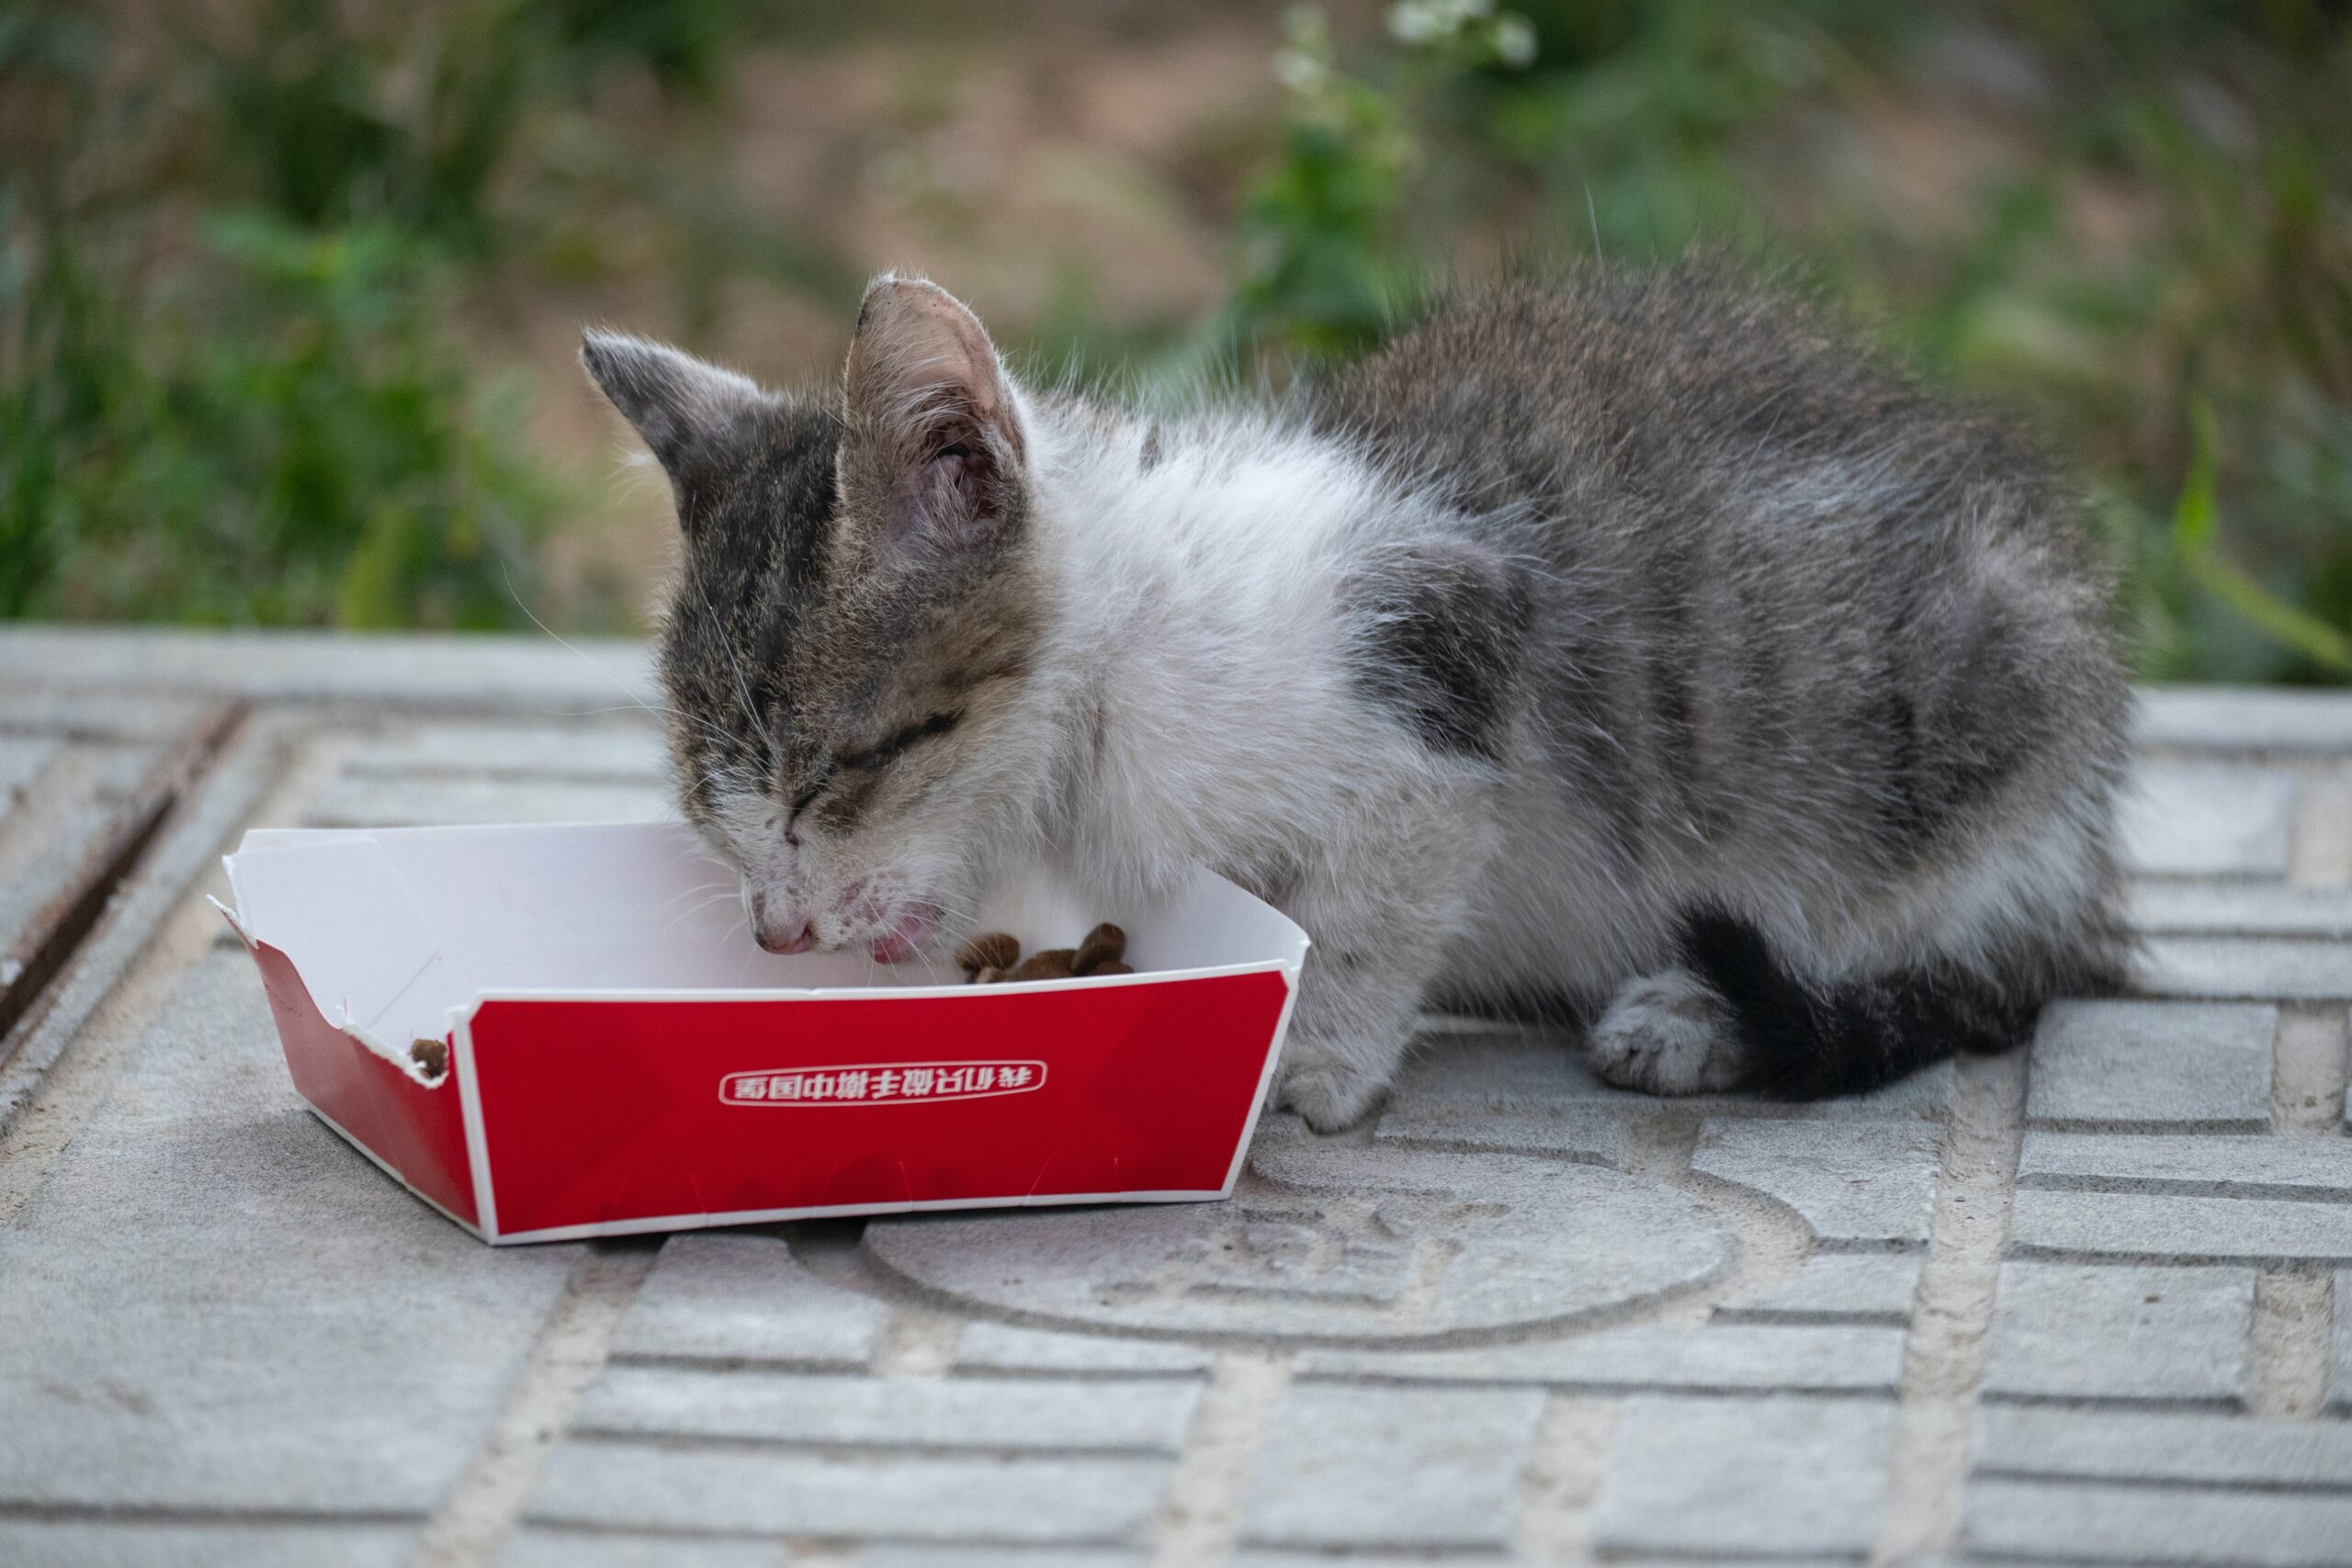 Cat eating chicken nuggets from a red bowl